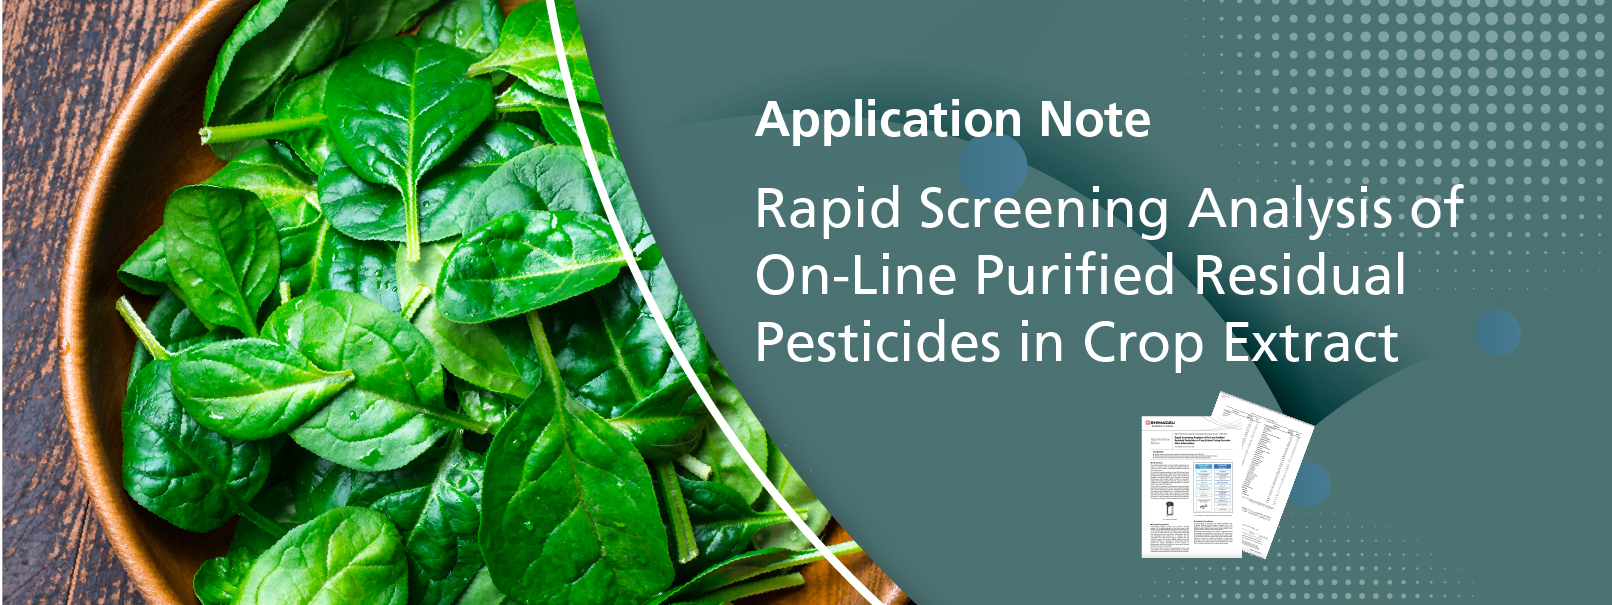 Rapid Screening Analysis of On-Line Purified Residual Pesticides in Crop Extract